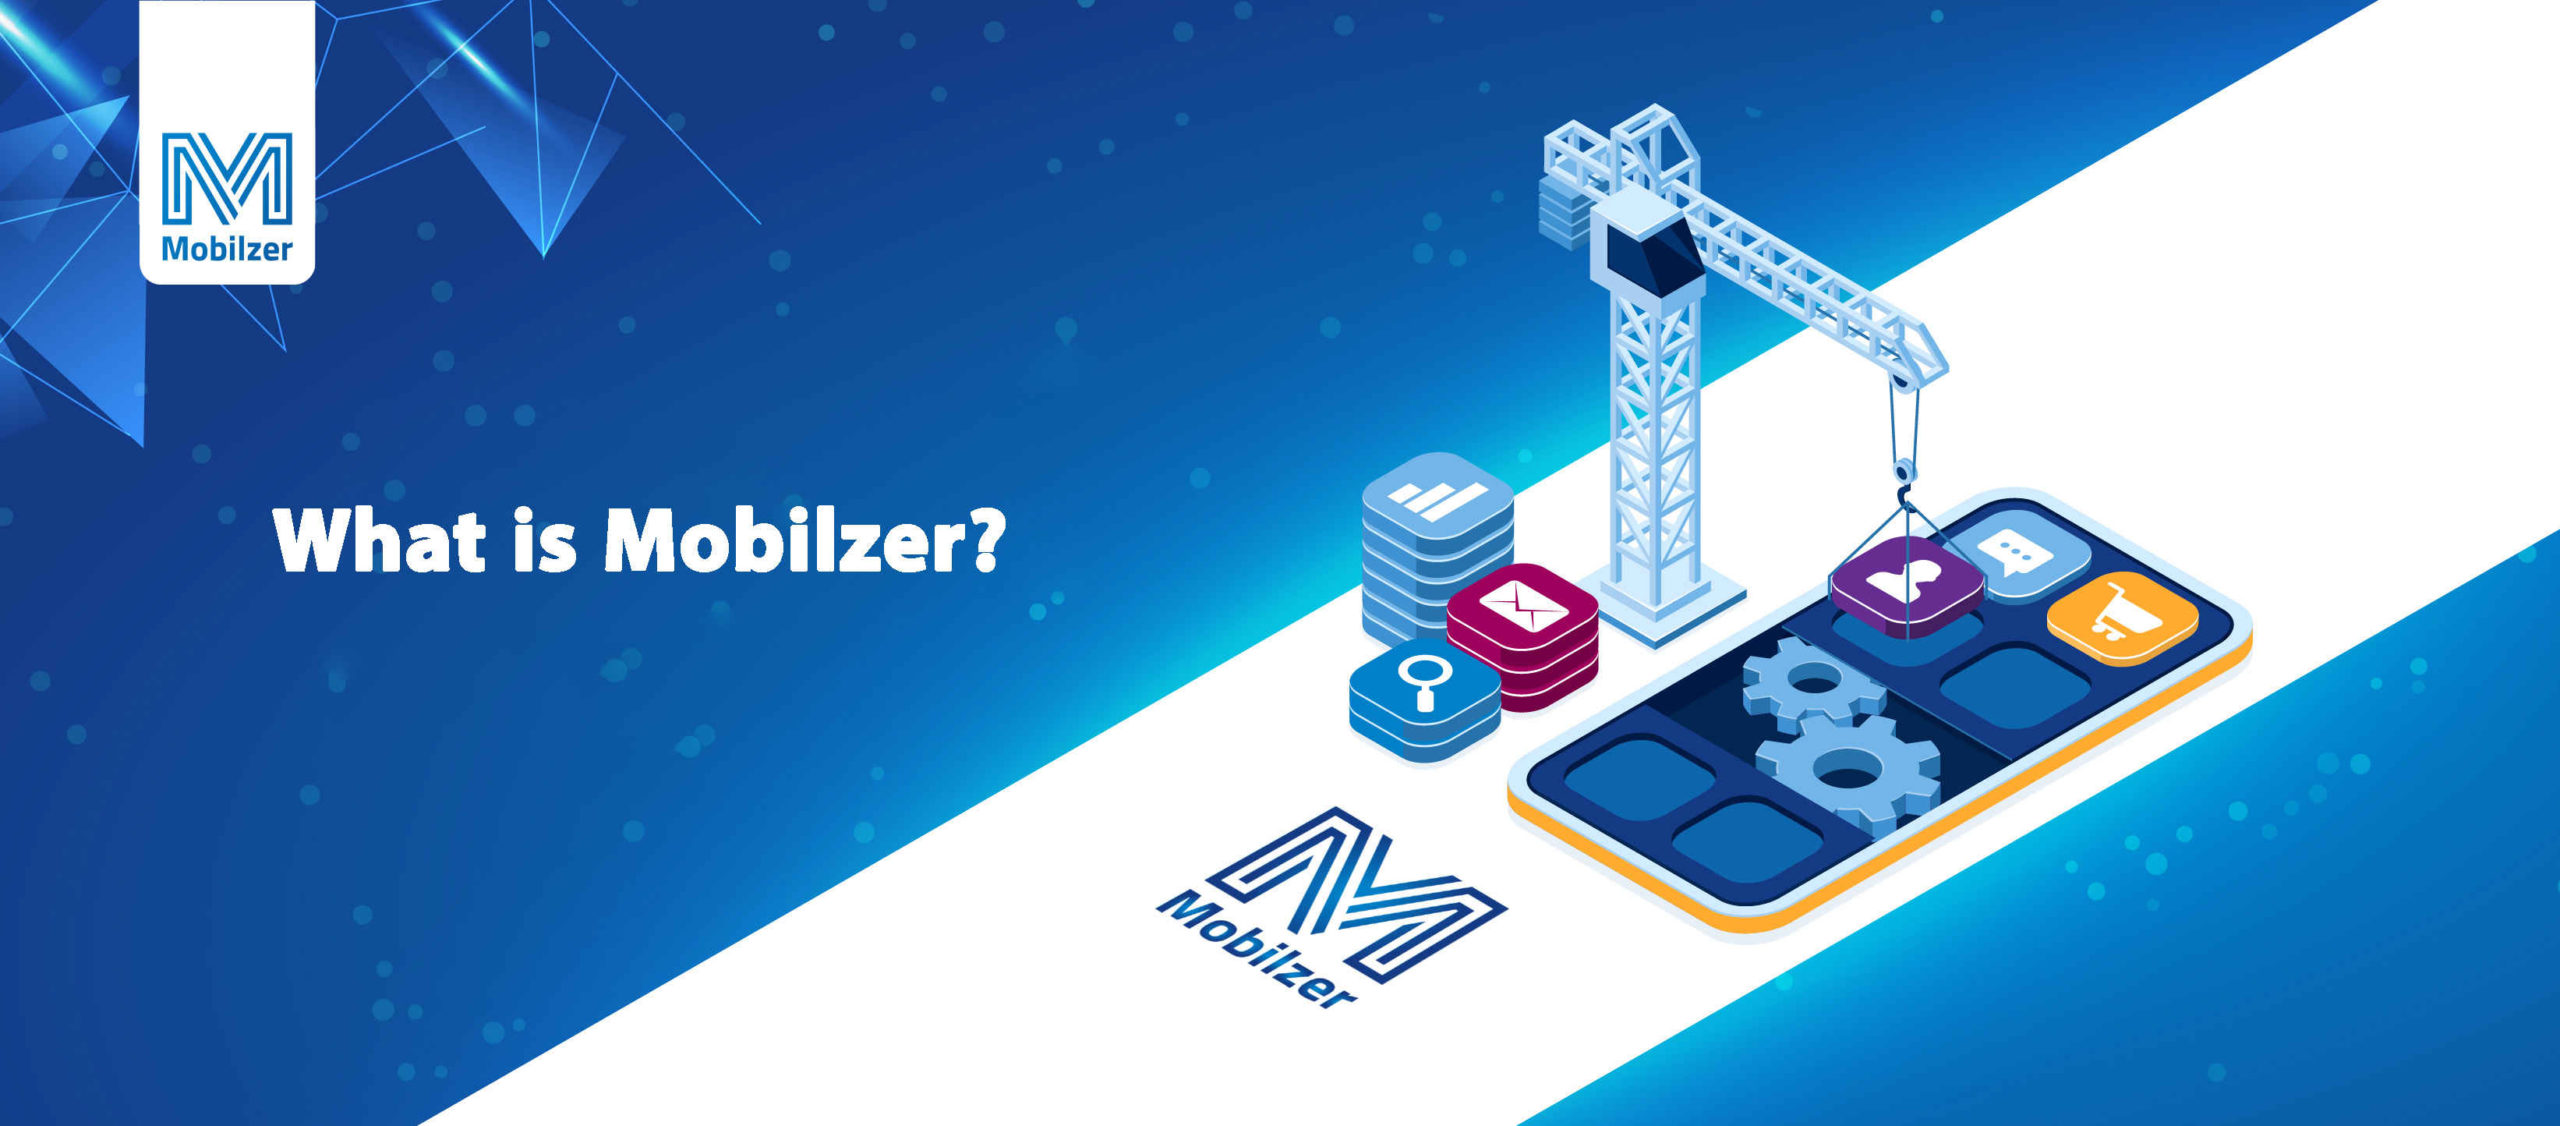 What is Mobilzer?